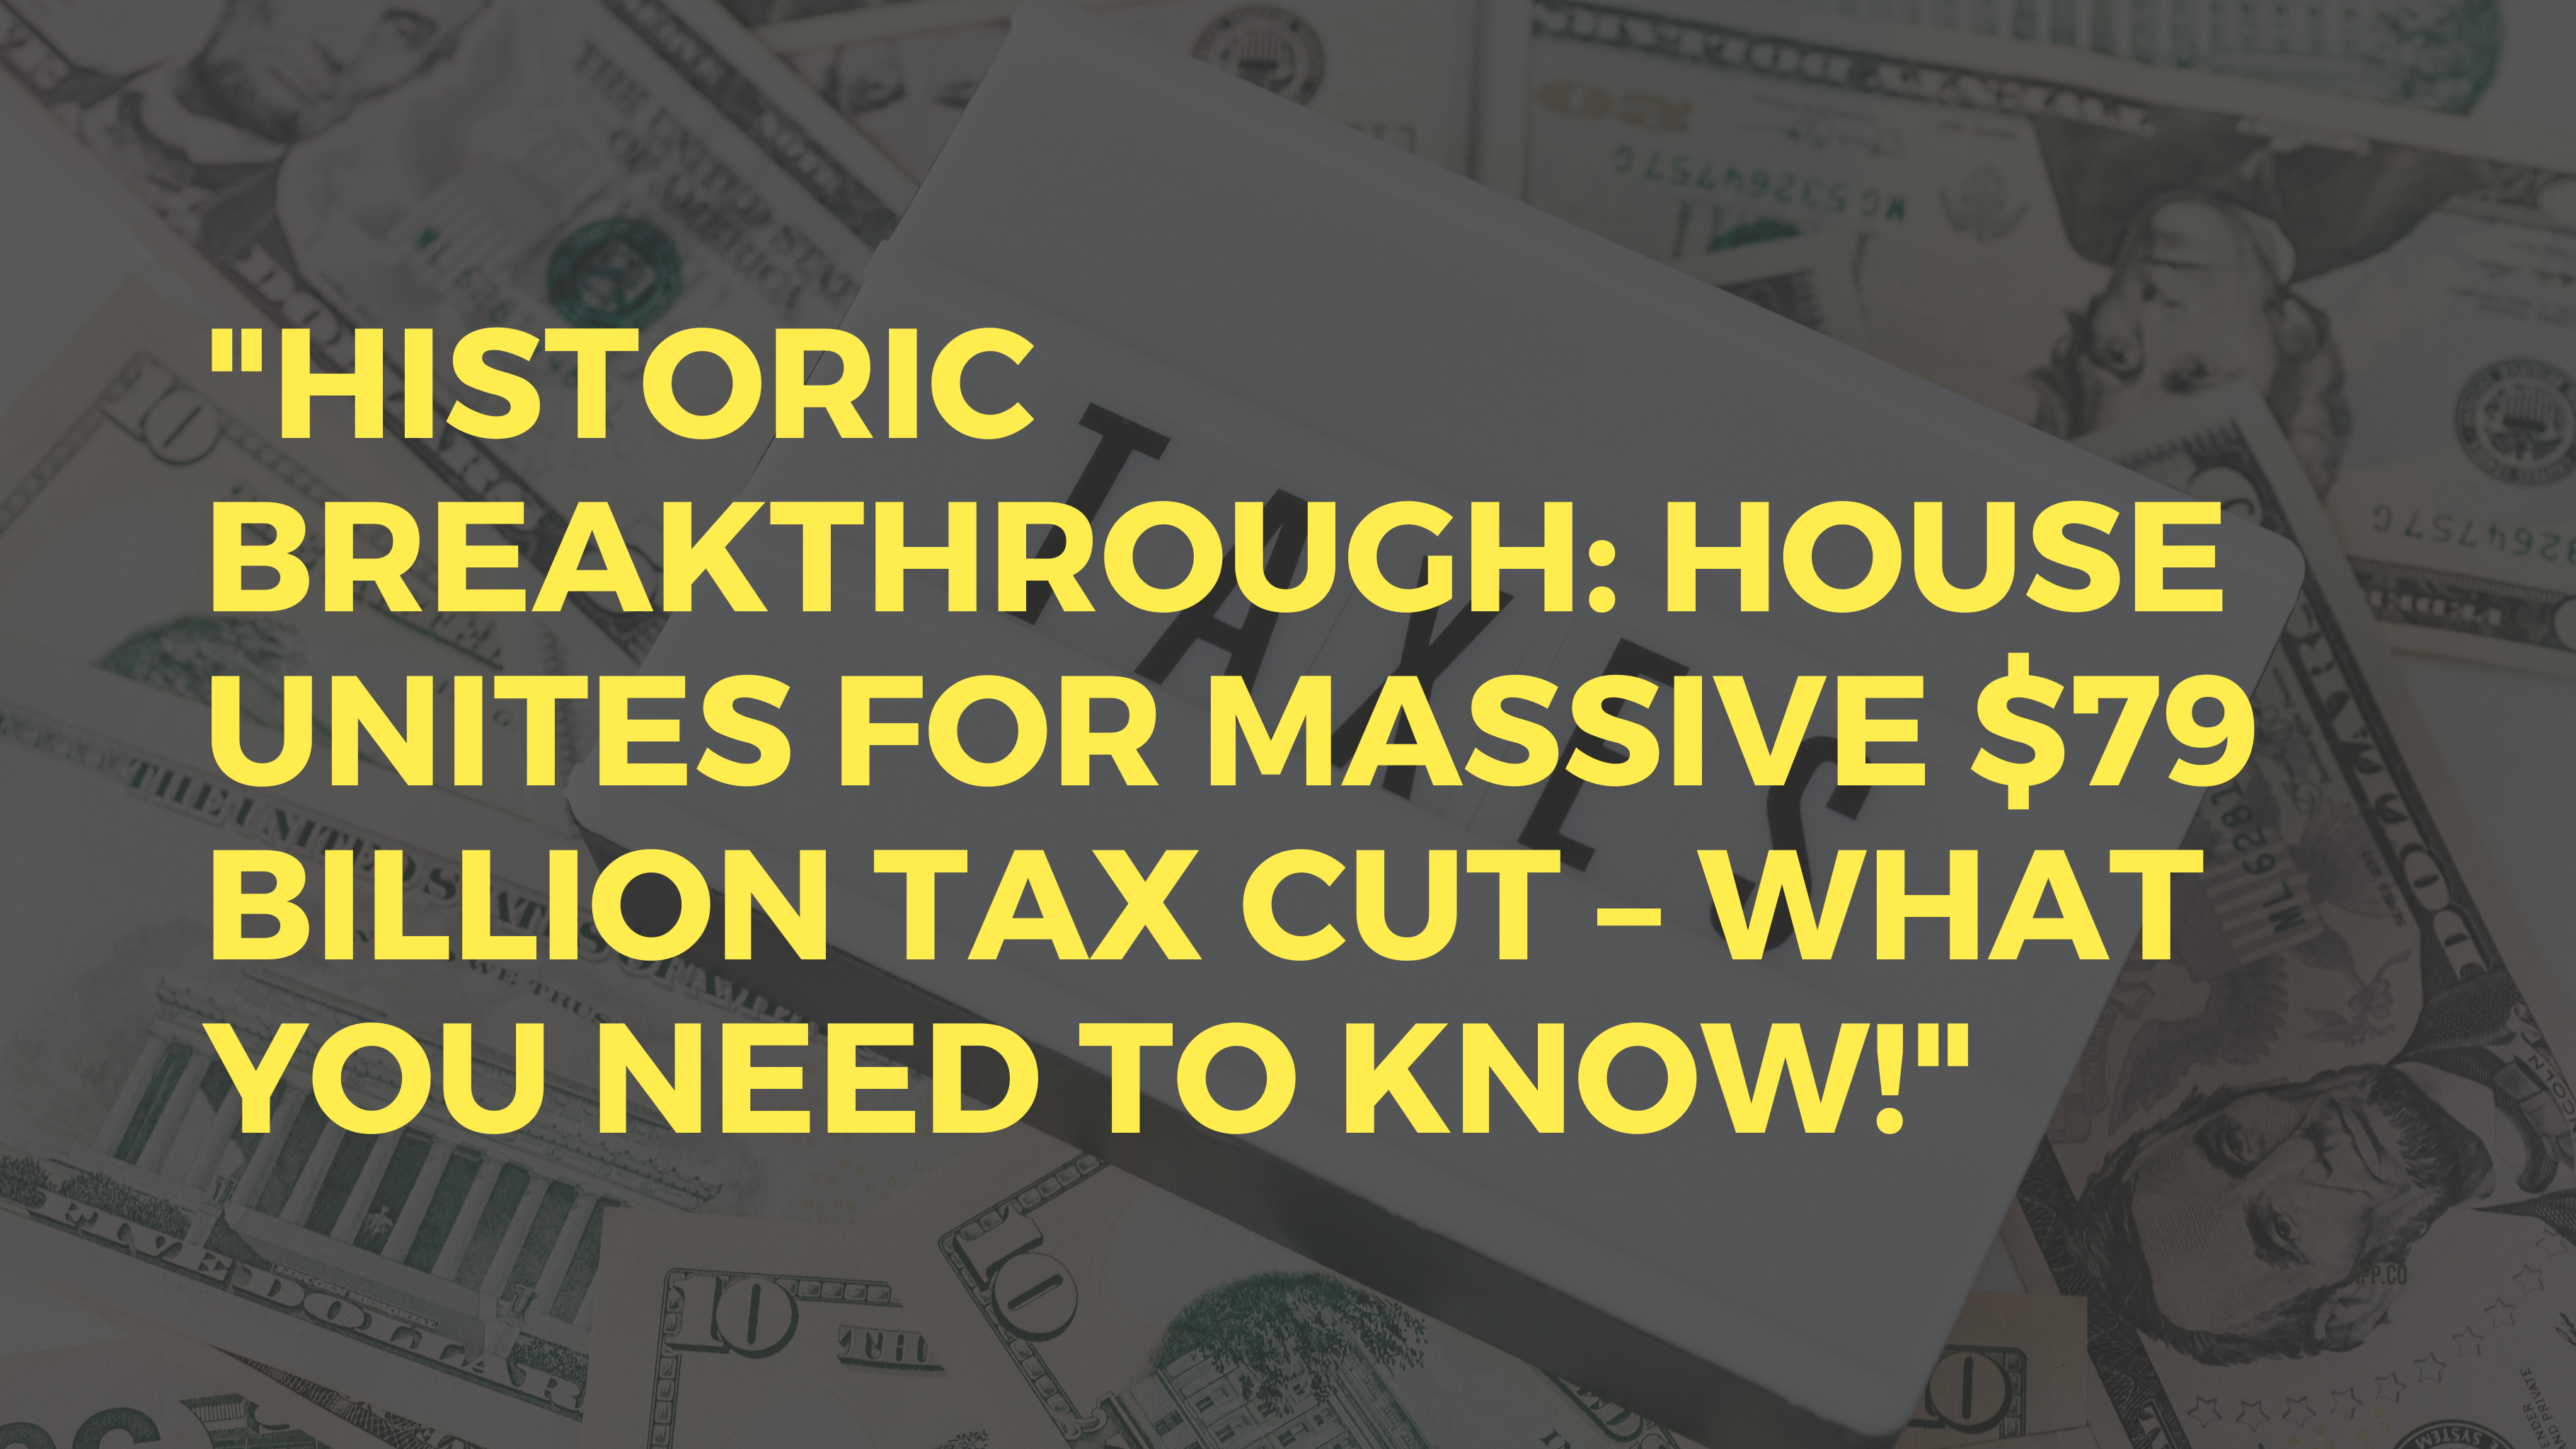 "Historic Breakthrough: House Unites for Massive $79 Billion Tax Cut – What You Need to Know!"